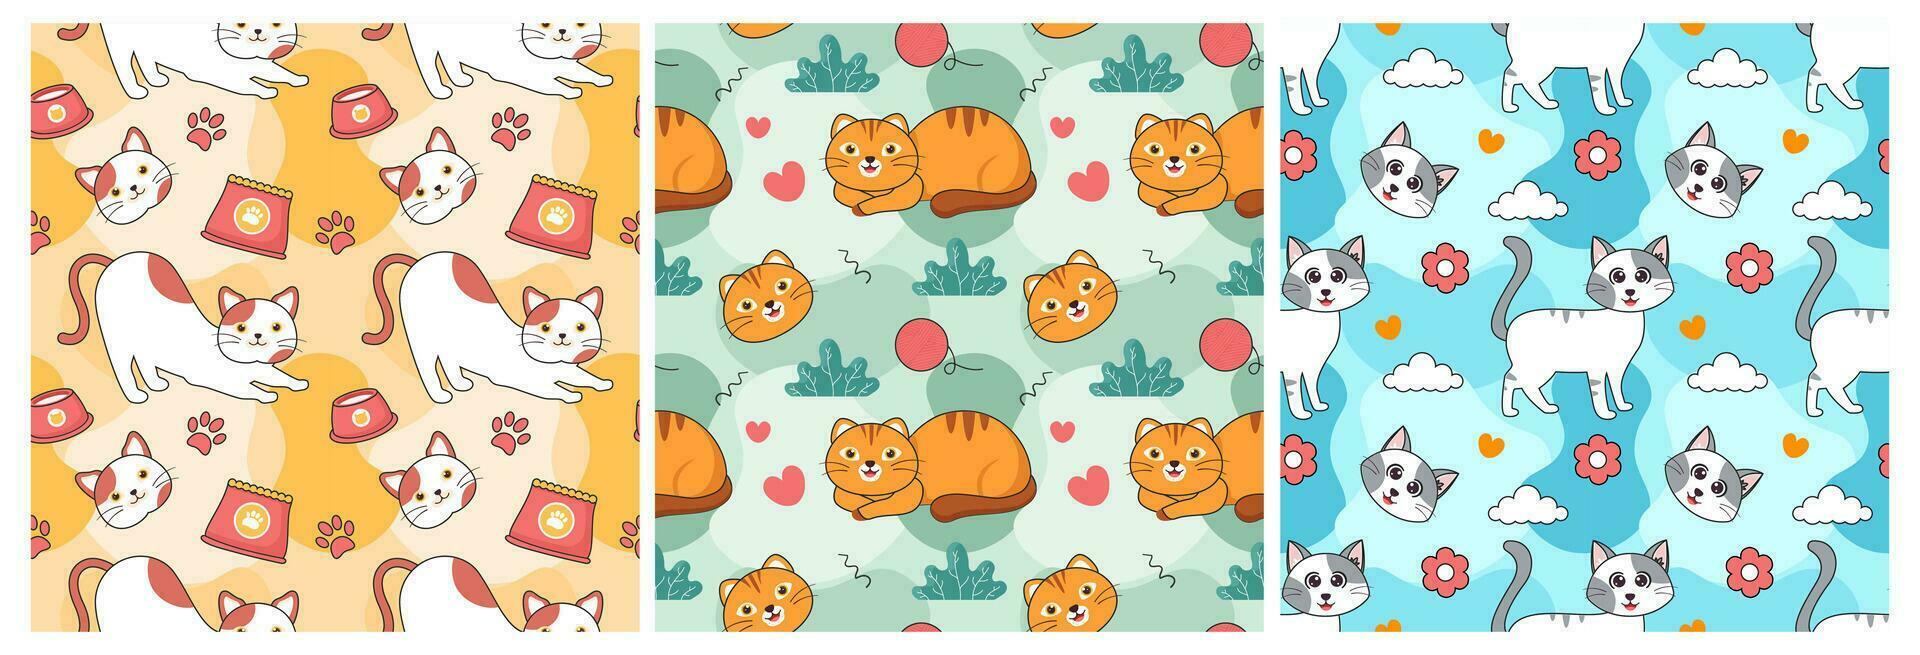 Set of Cats Animals Seamless Pattern Design with Cat Element in Template Hand Drawn Cartoon Flat Illustration vector